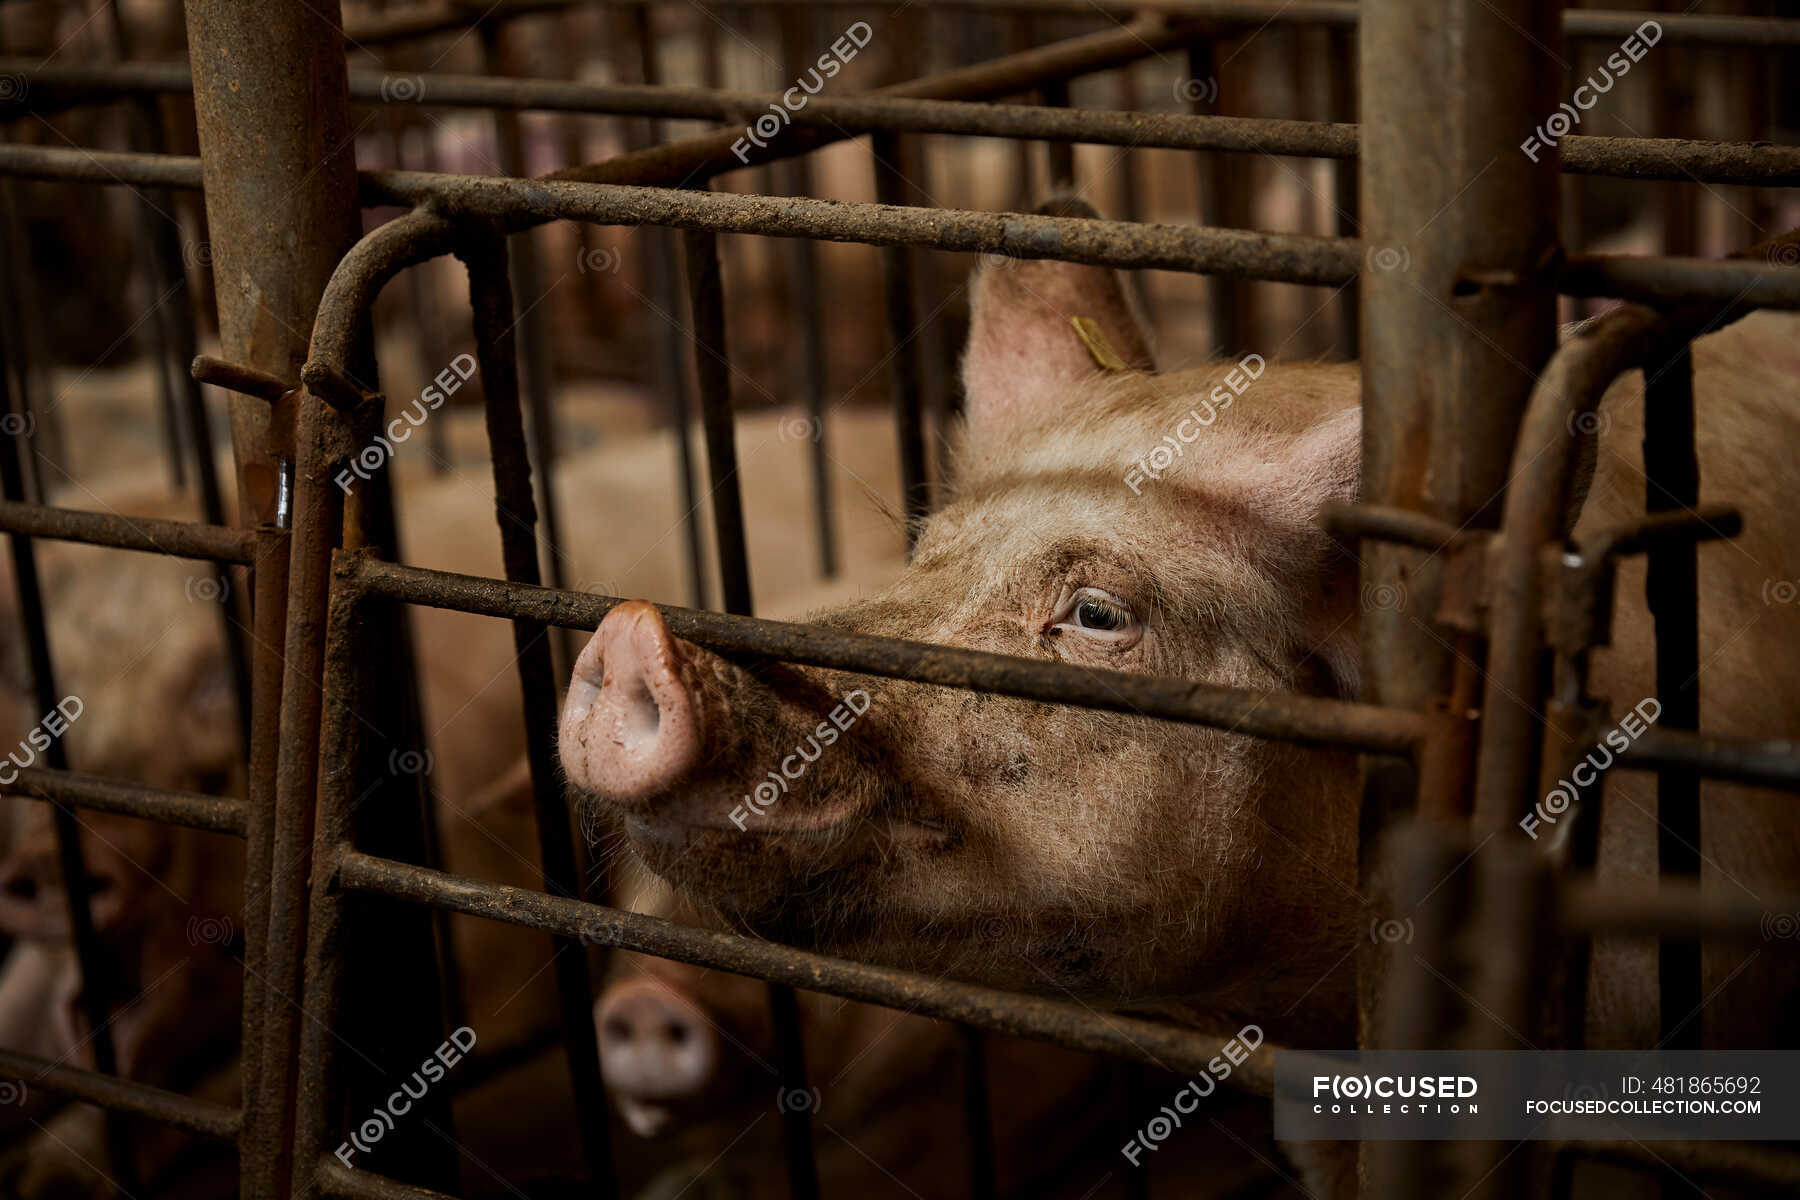 Pigs in cage at animal pen — agriculture, nobody - Stock Photo | #481865692